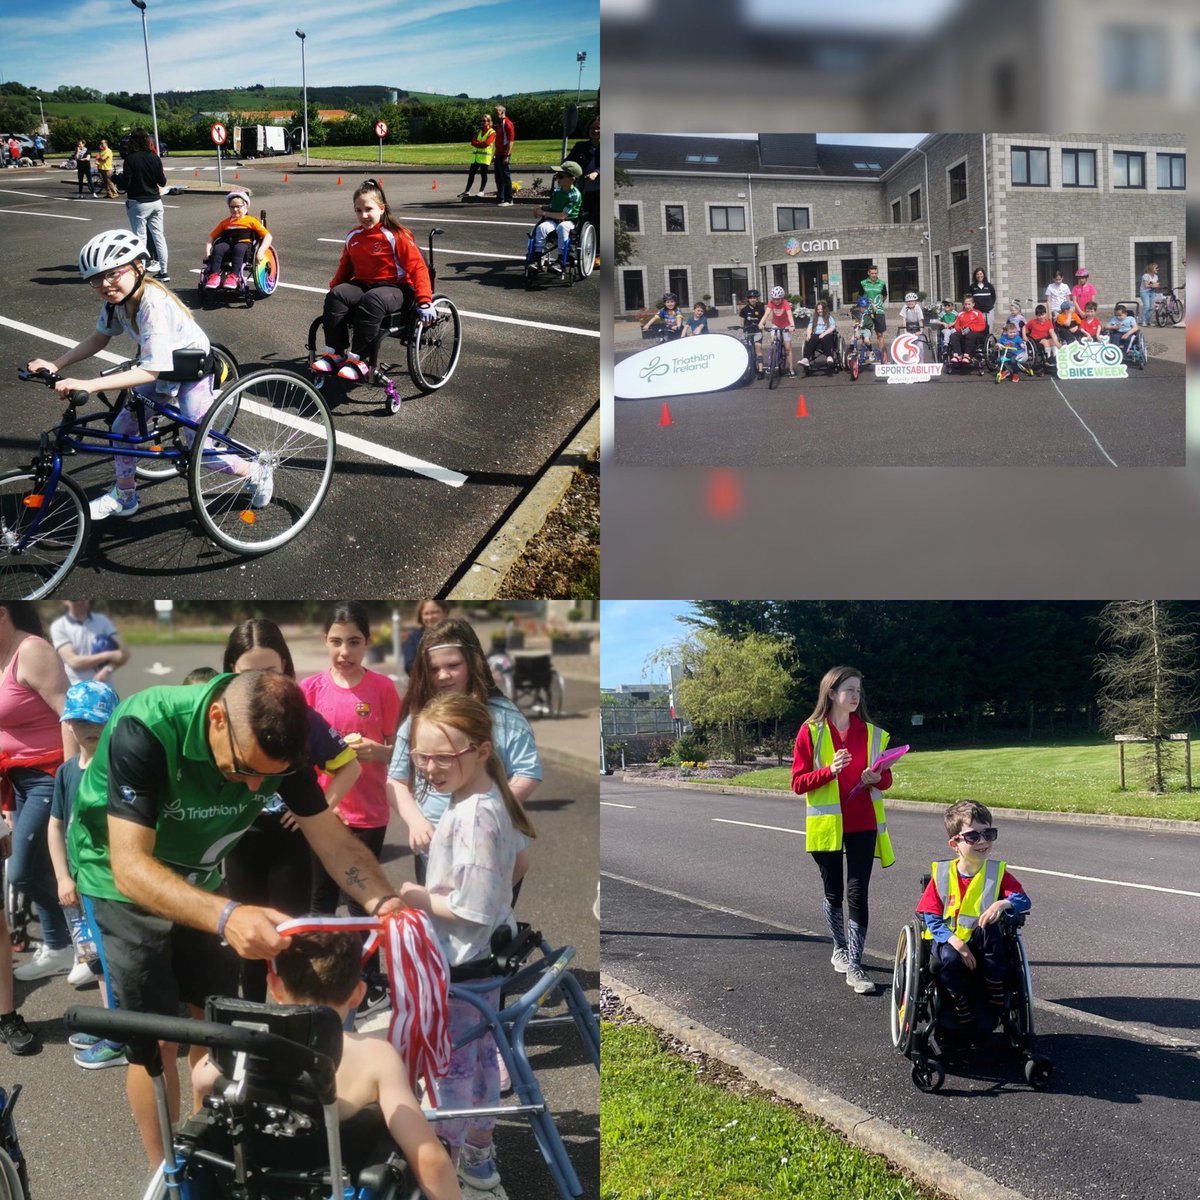 It was a great day at @CrannCentre to celebrate #BikeWeekCork with @CorkSports & Eleanor and Gary from @tri_ireland who took our jnr members through a dualthlon training session! Thanks to Benoit Keane & Niall Gearney for their recent donation that make days like these possible